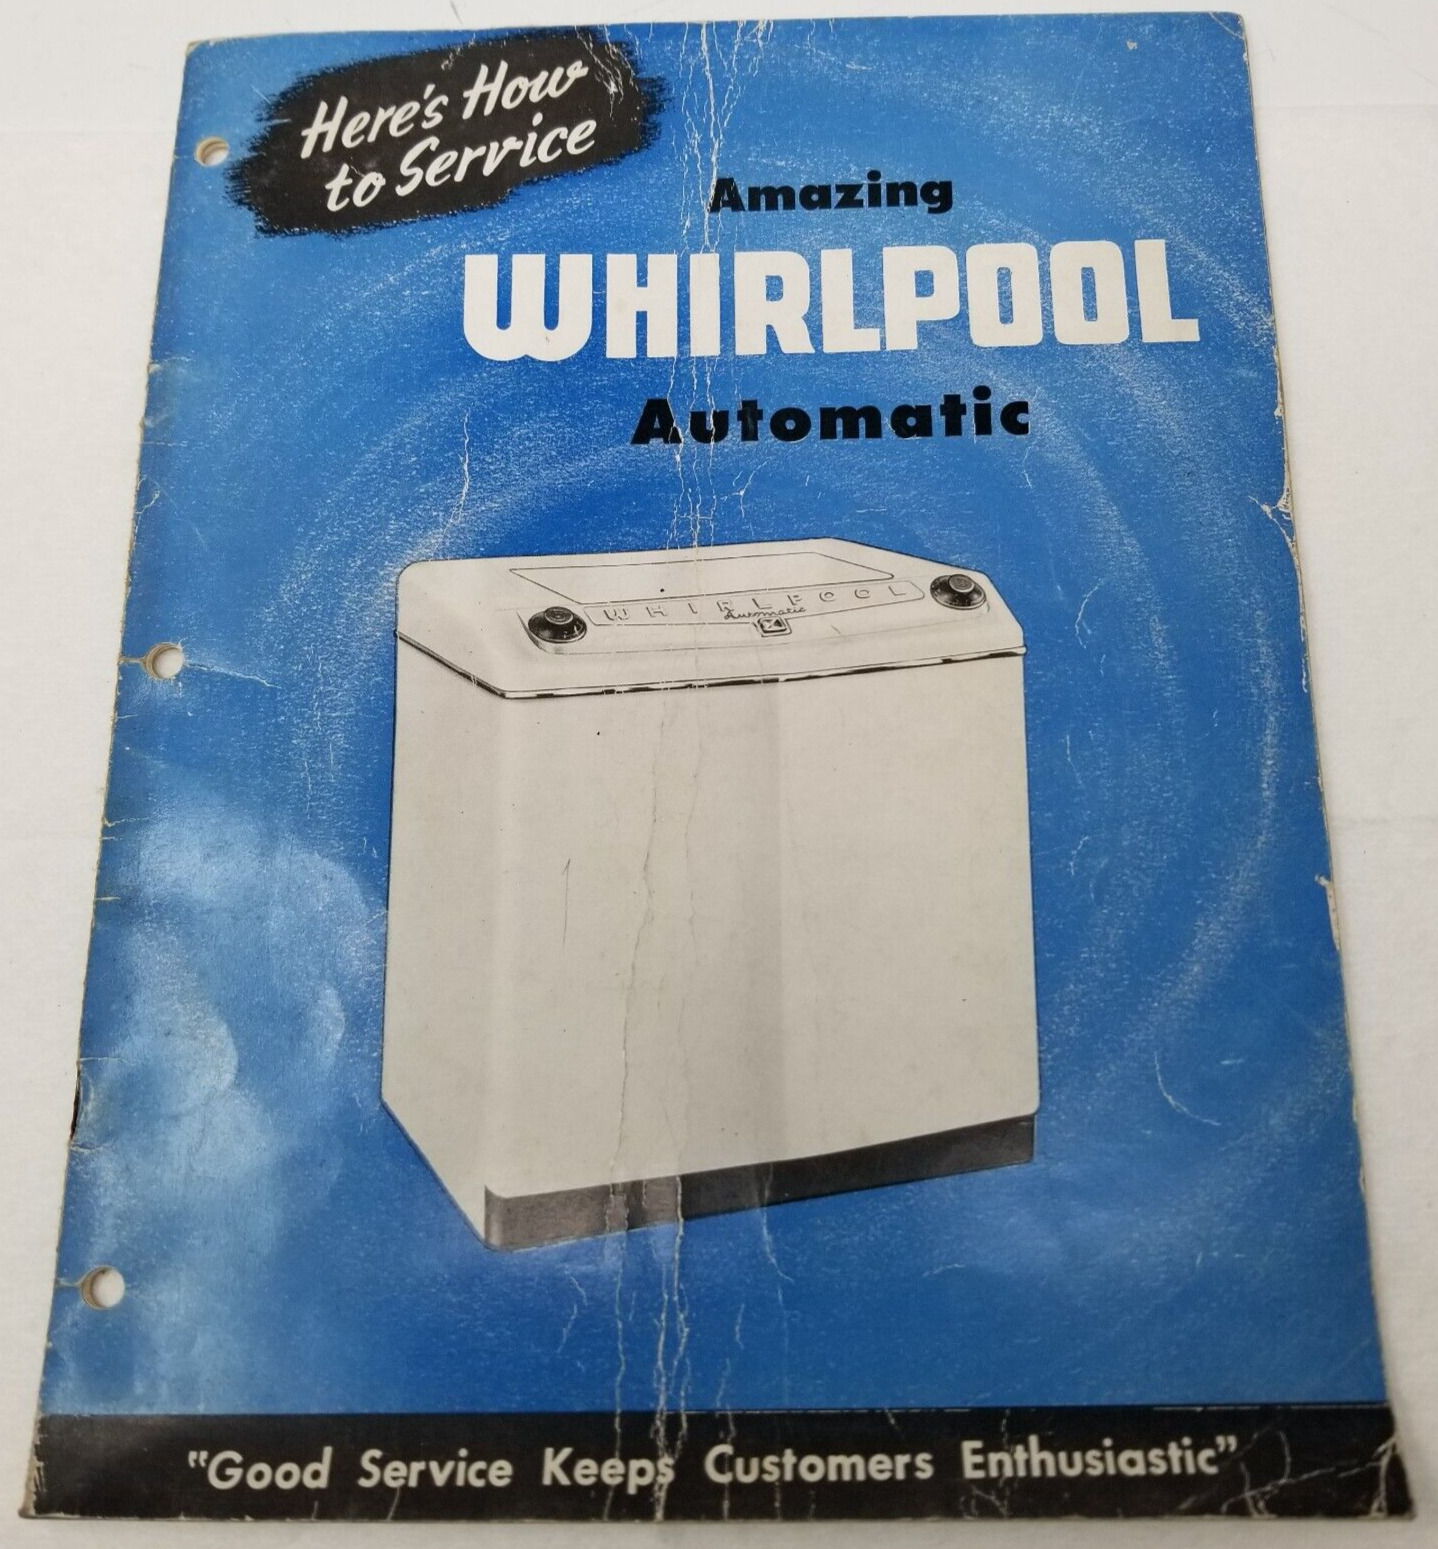 Here\'s How to Service Amazing Whirlpool Automatic Washer 1948 Nineteen Hundred